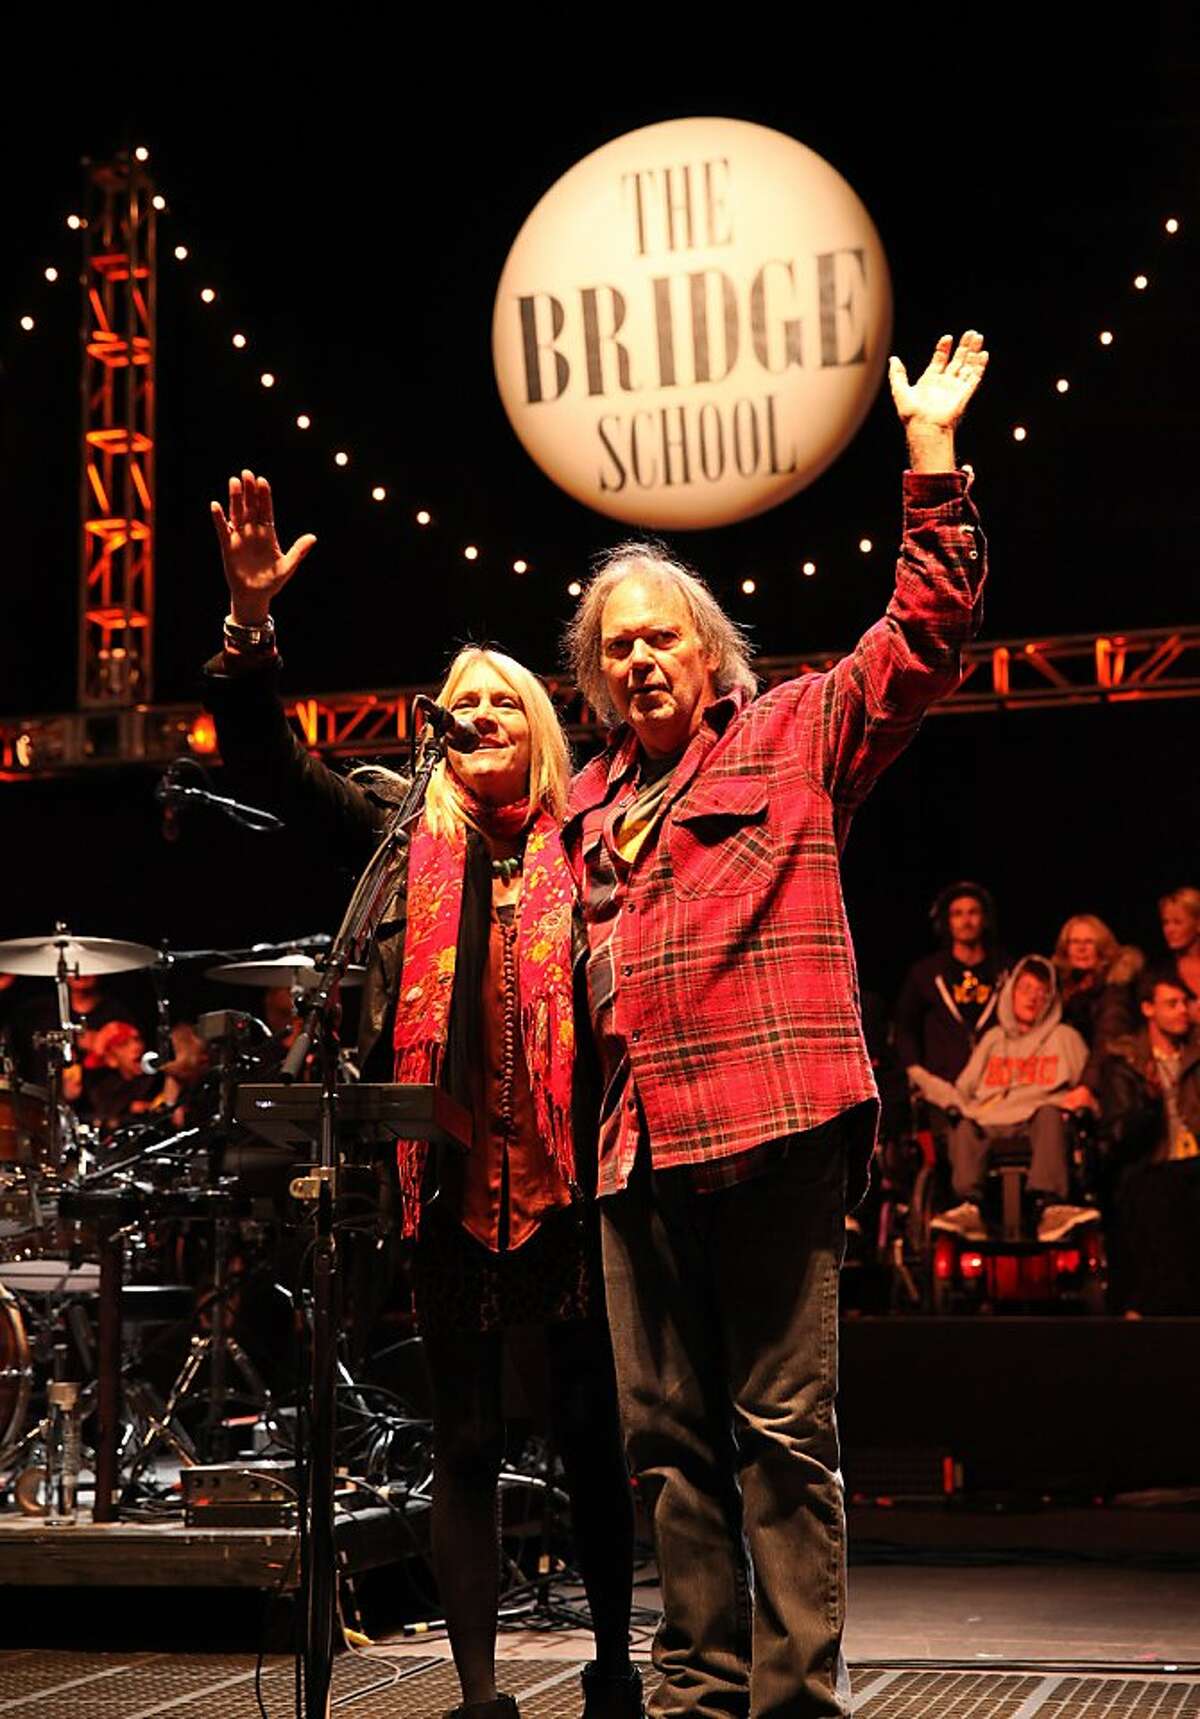 Pegi Young and Neil Young say good night at the Bridge School Benefit Concert at the Shoreline Amphitheatre on Saturday, Oct. 20, 2012, in Mountain View, Calif. 